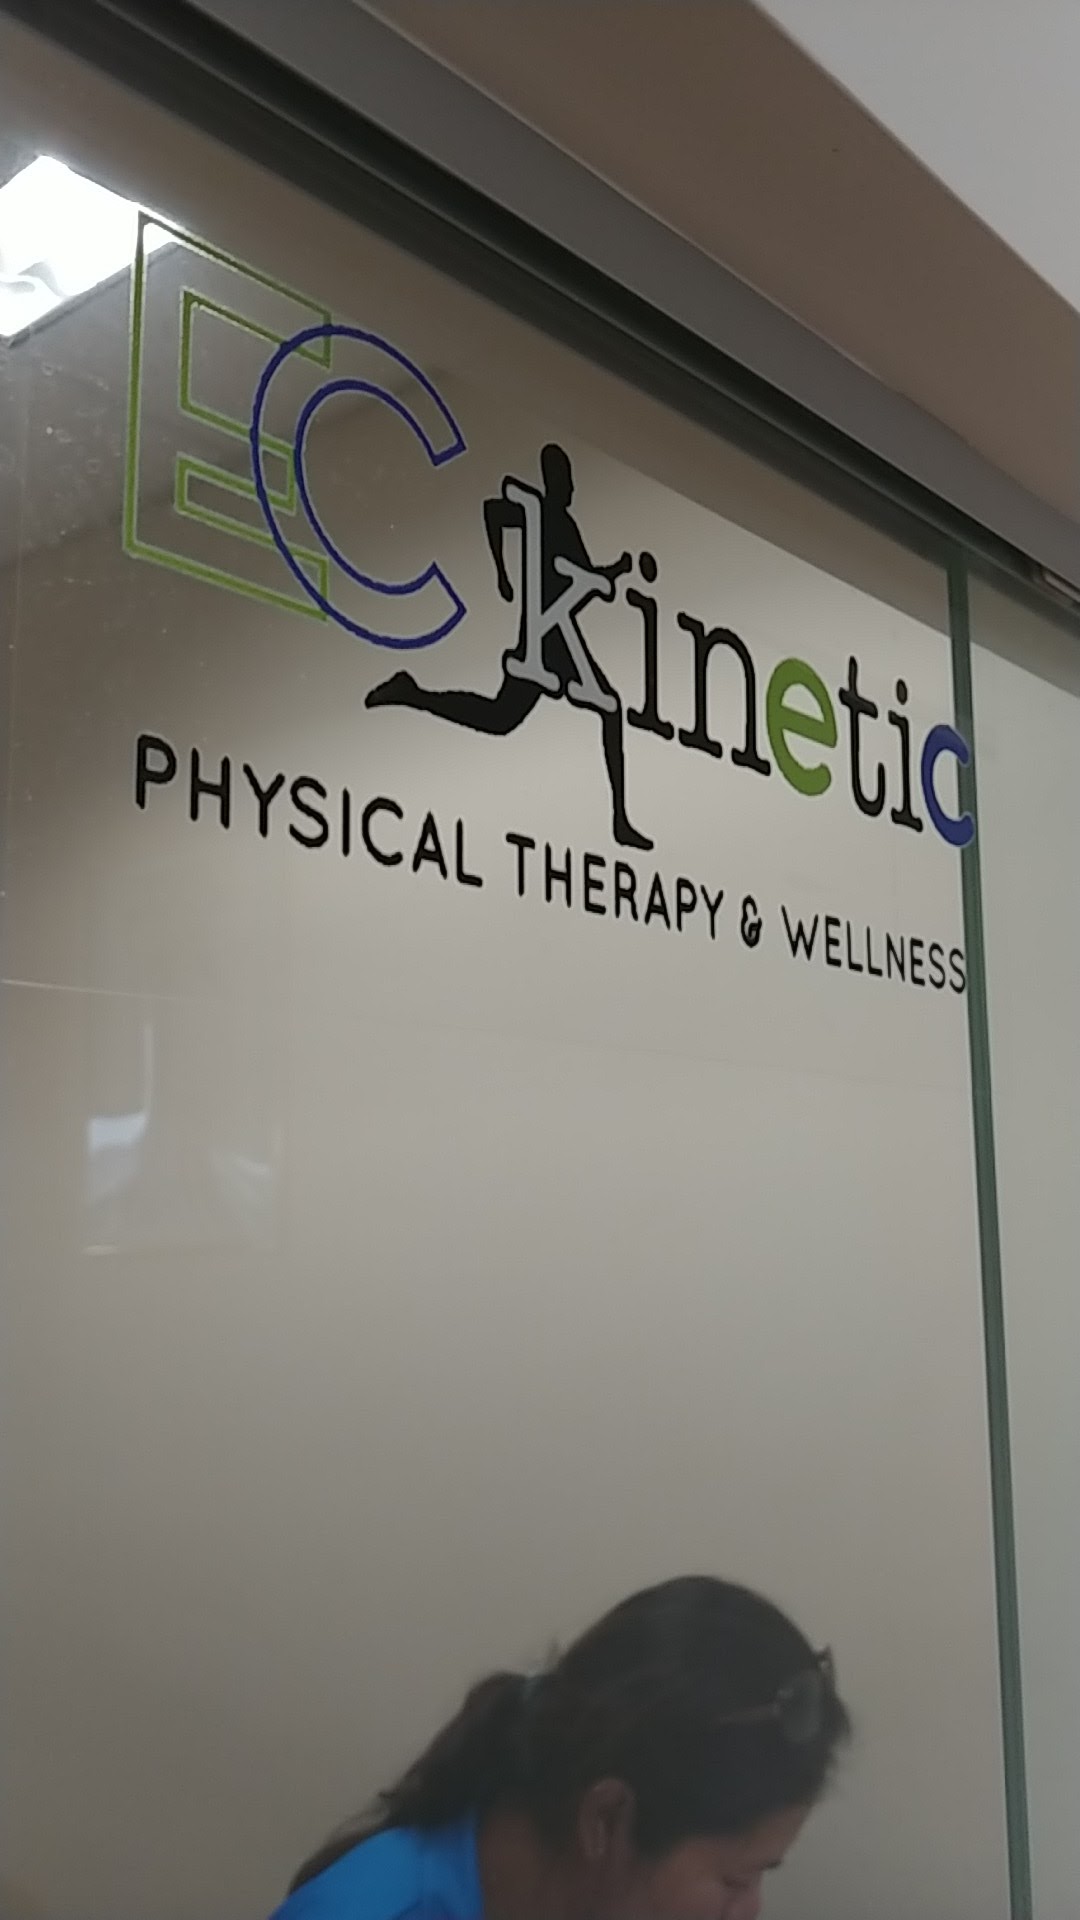 EC Kinetic Physical Therapy & Wellness Caldwell Medical Plaza, 526 Bloomfield Ave Suite 102, Caldwell New Jersey 07006